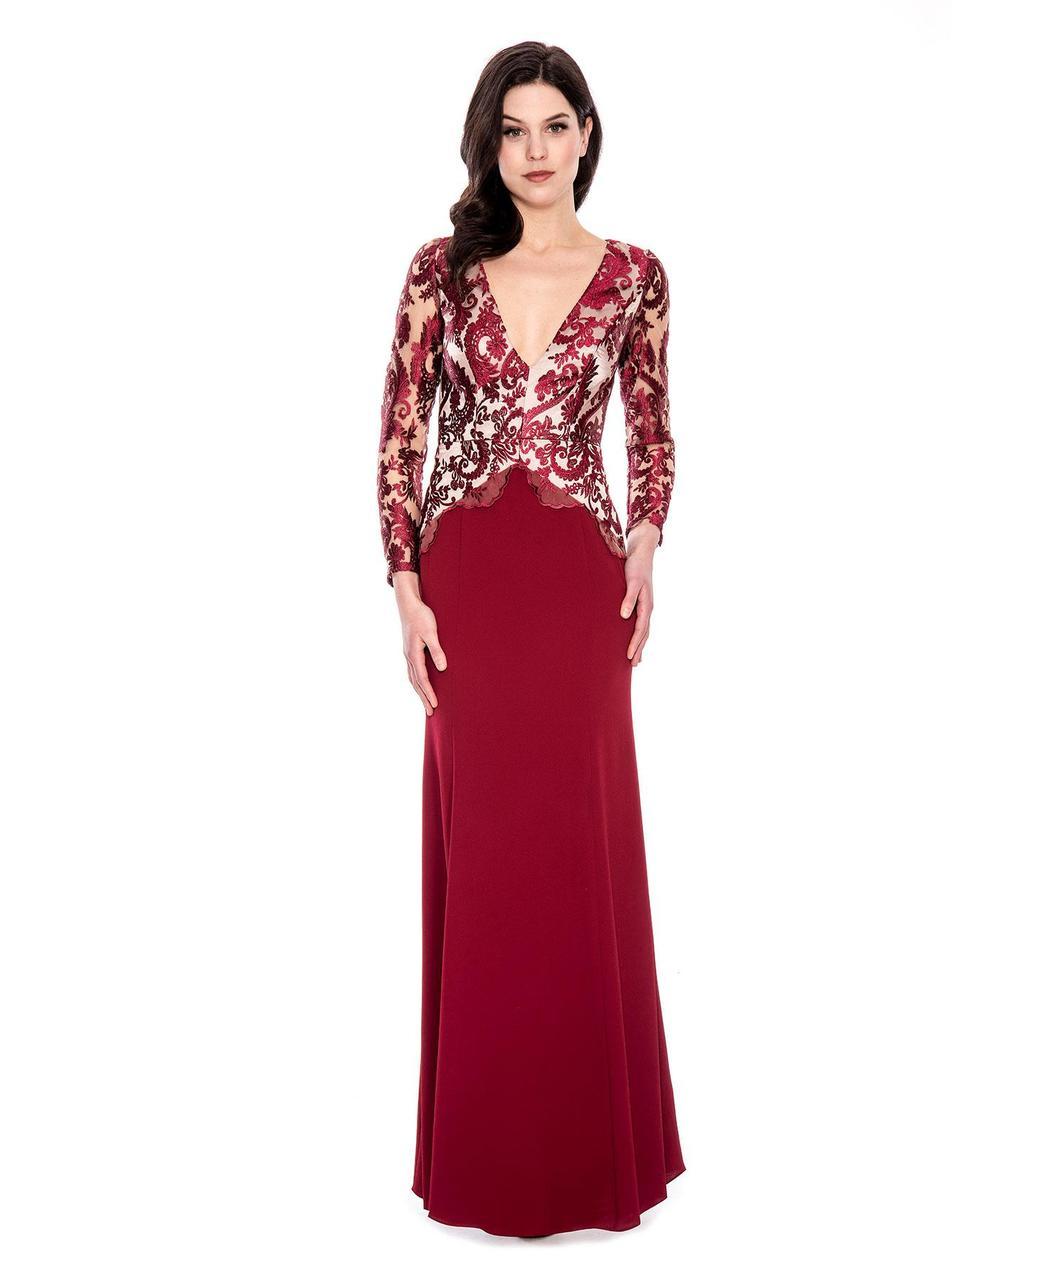 Decode 1.8 - Embroided V Neck Long Sleeves Long Dress 183794 in Red and Nude